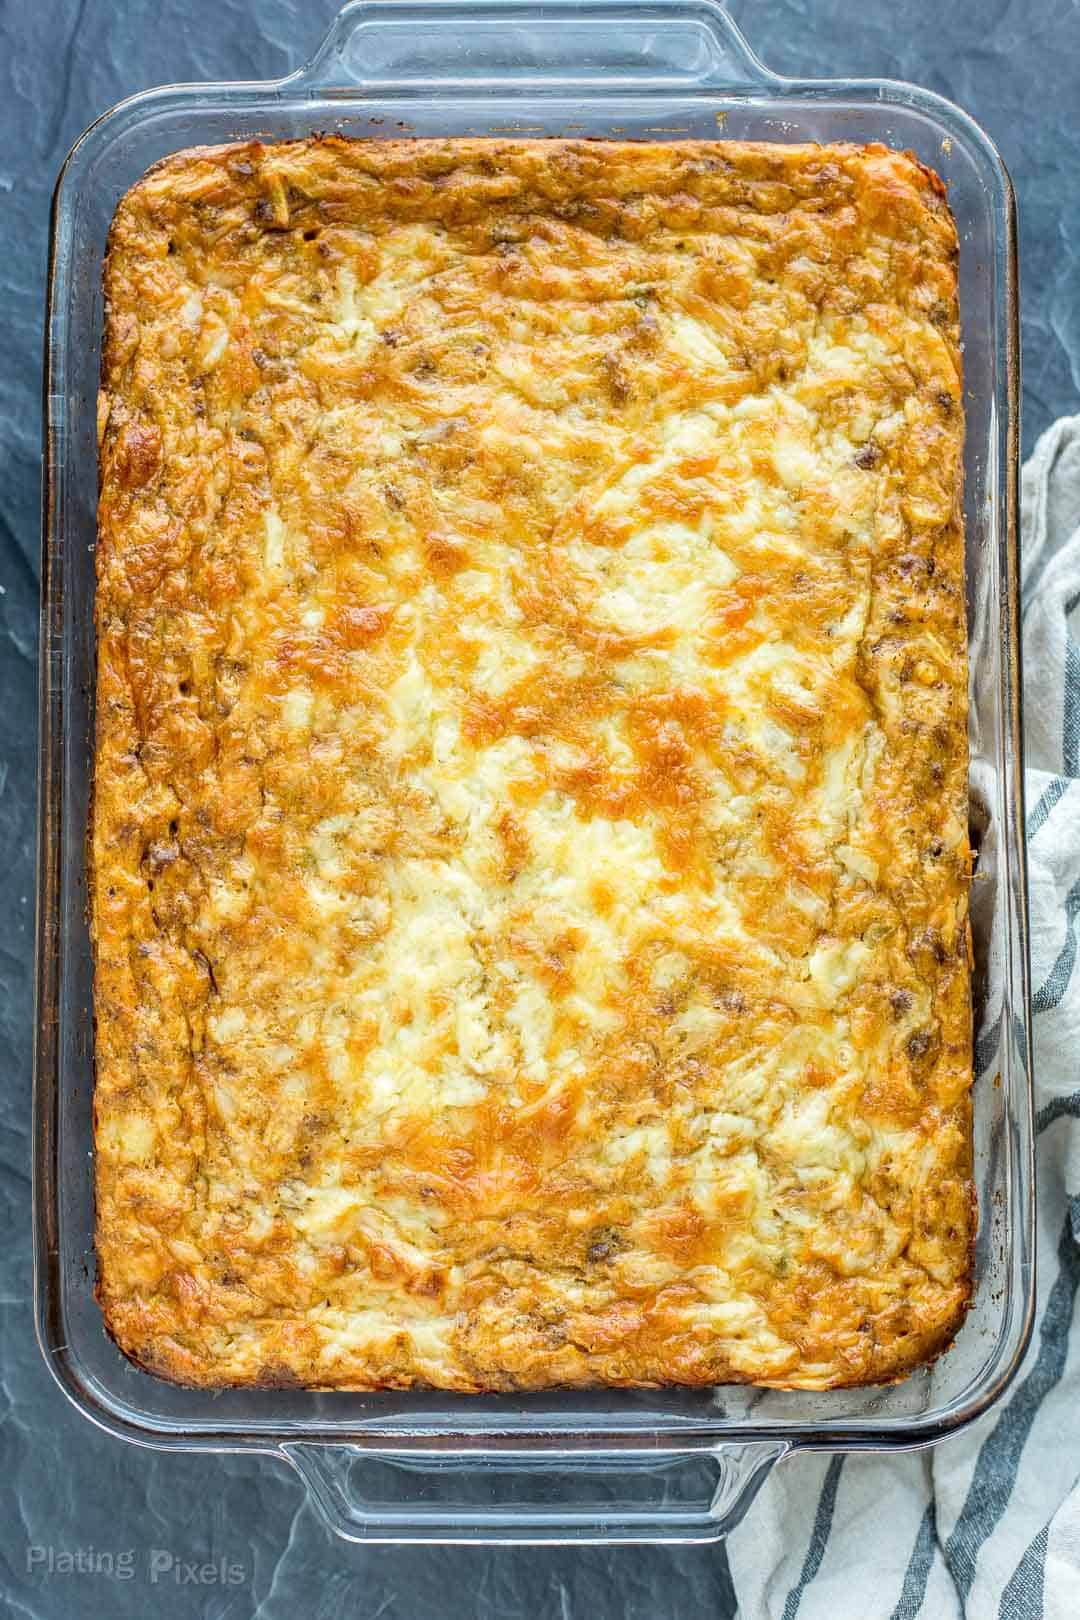 Just baked Hash Brown Breakfast Casserole in a glass baking dish